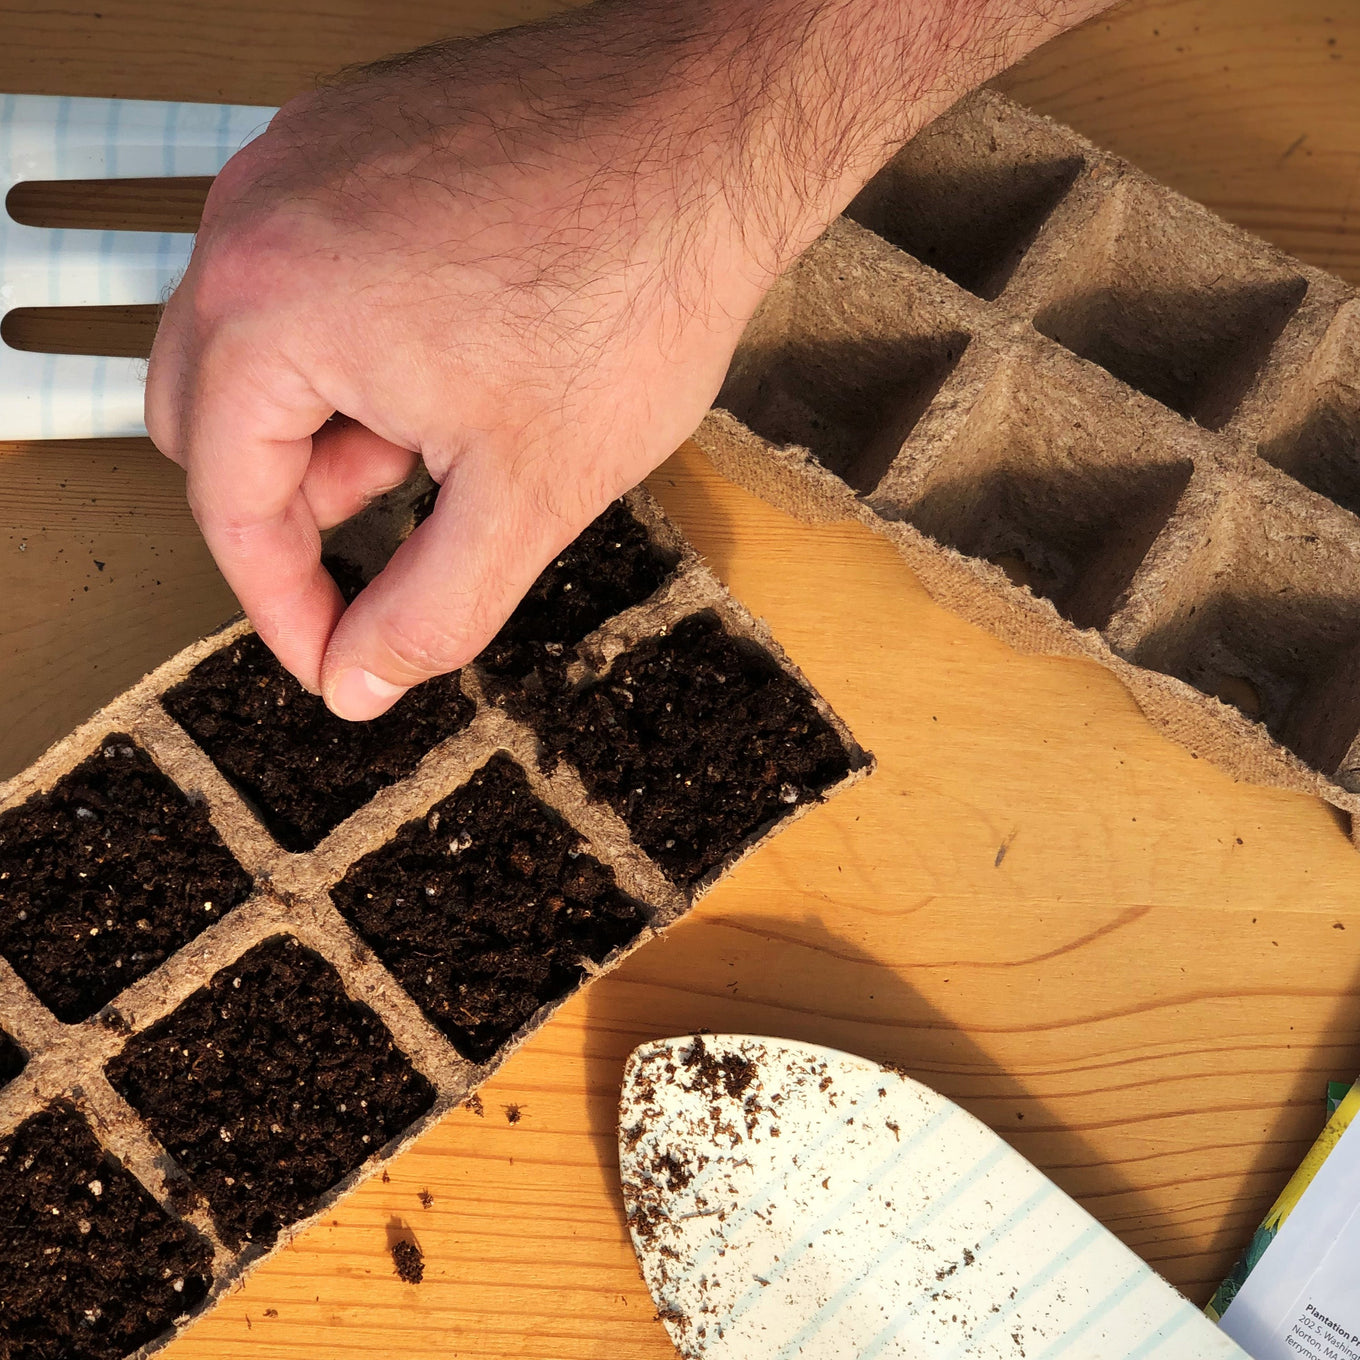 Start your Poinsett 76 Cucumber seeds in biodegradable peat or paper strips.